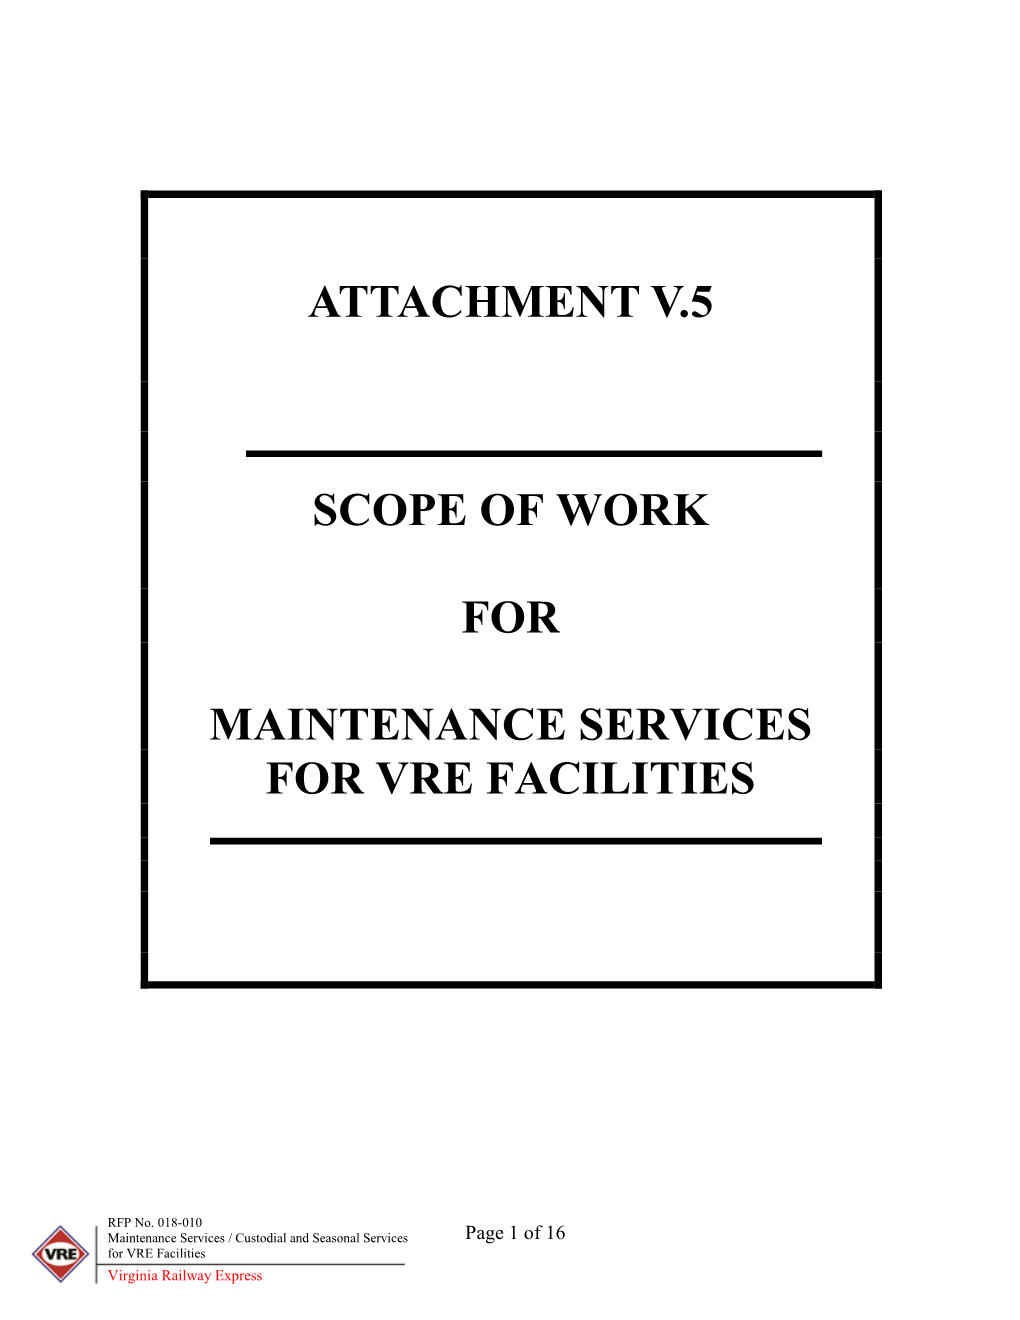 Attachment V.5 Scope of Work for Maintenance Services for Vre Facilities